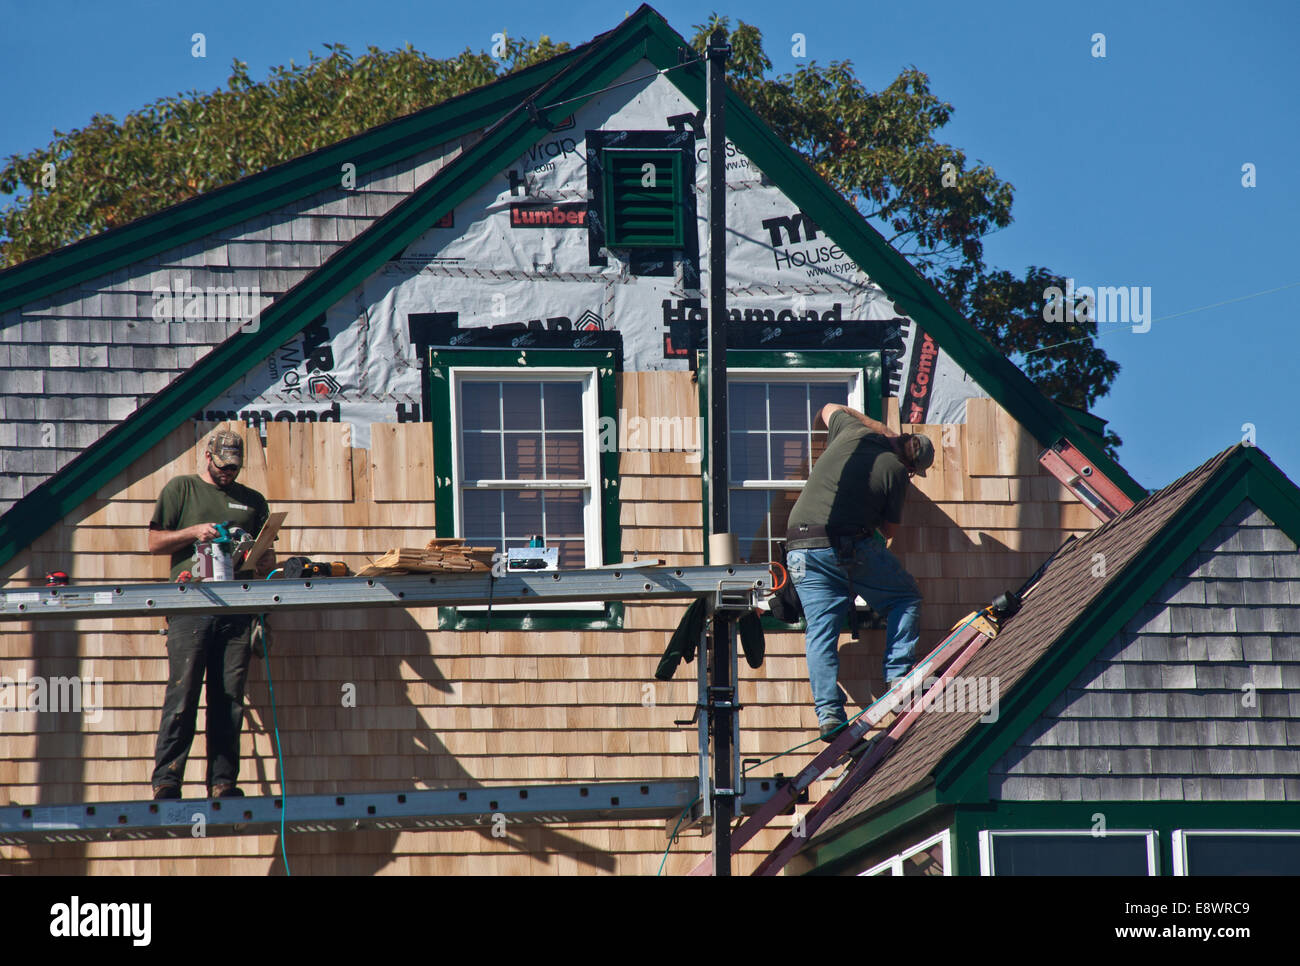 Men shingling a house in New harbor, Maine Stock Photo